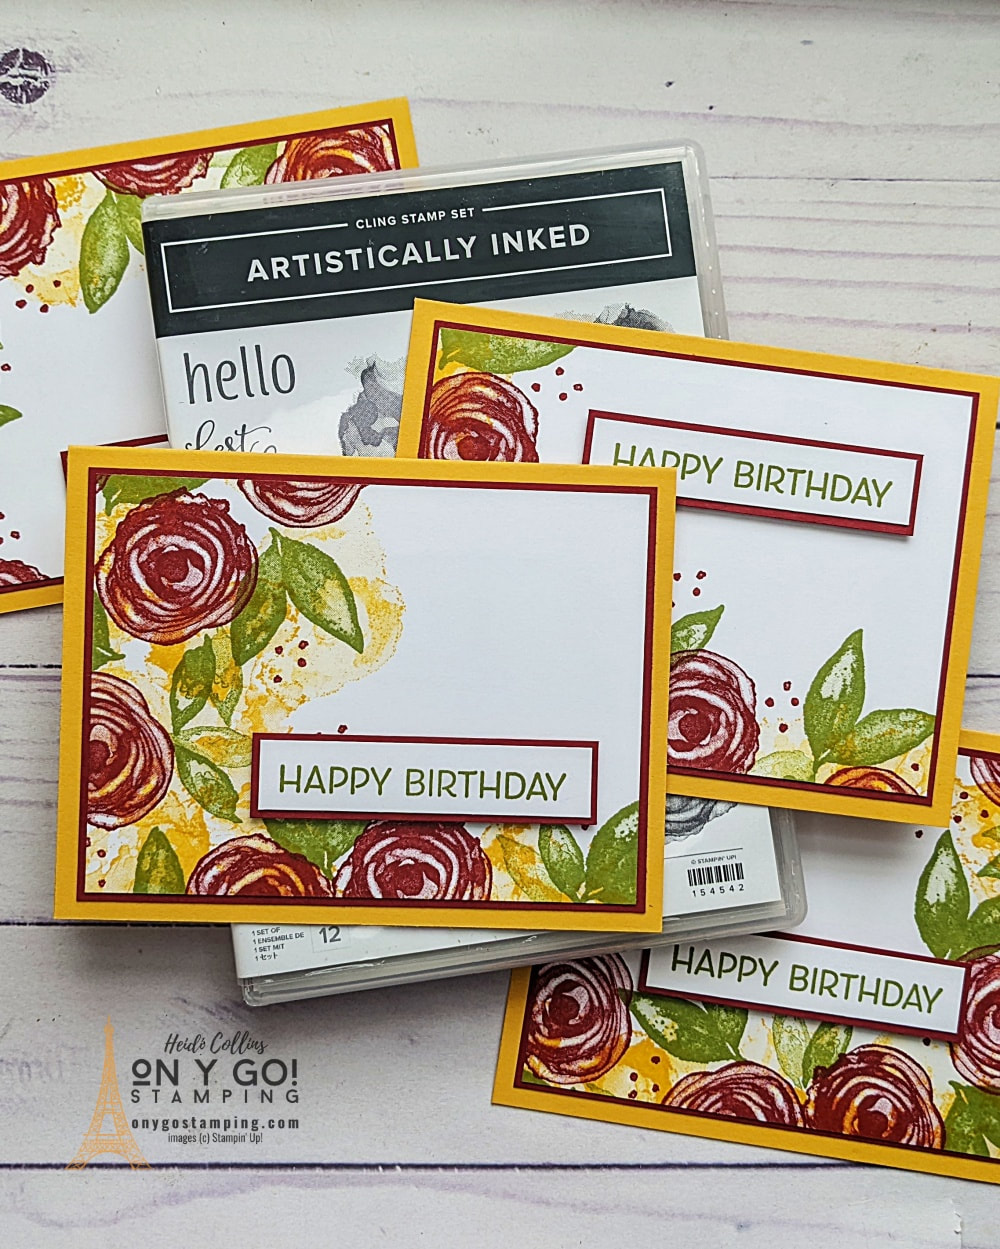 Use the Artistically Inked stamp set from Stampin' Up! and the four-square card technique to create quick and easy handmade birthday cards.